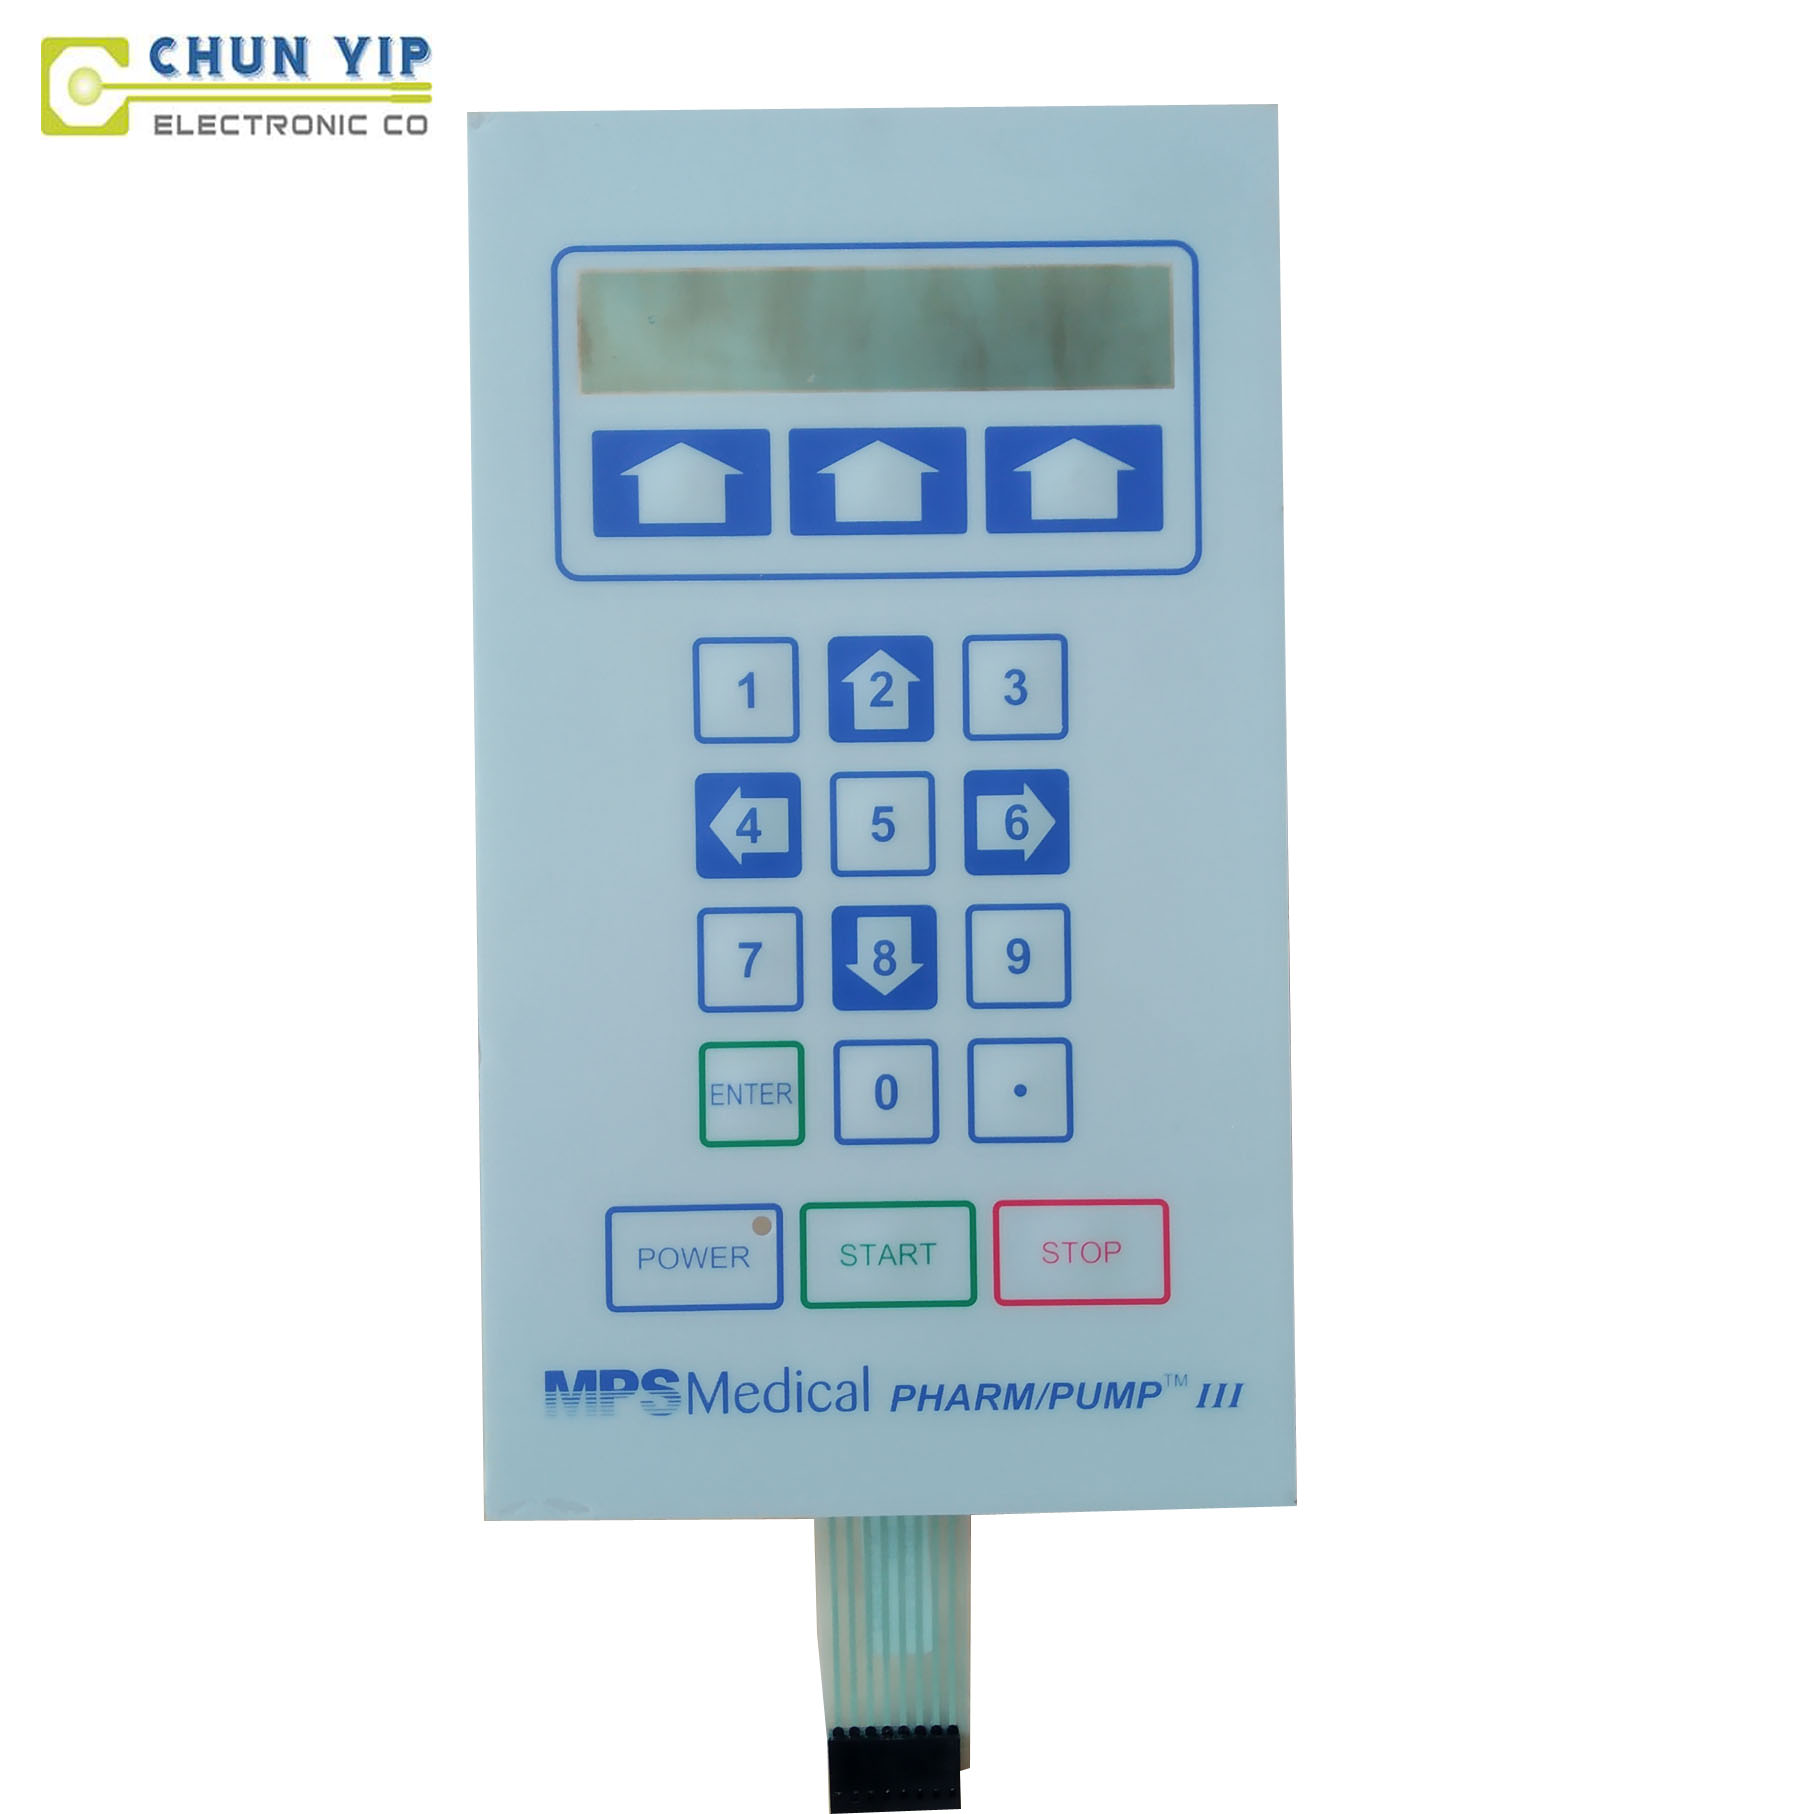 Prepainted Aluminum Coil Alligator Clips Test Leads -
 Medical apparatus and instruments Membrane Switch – Chun Yip